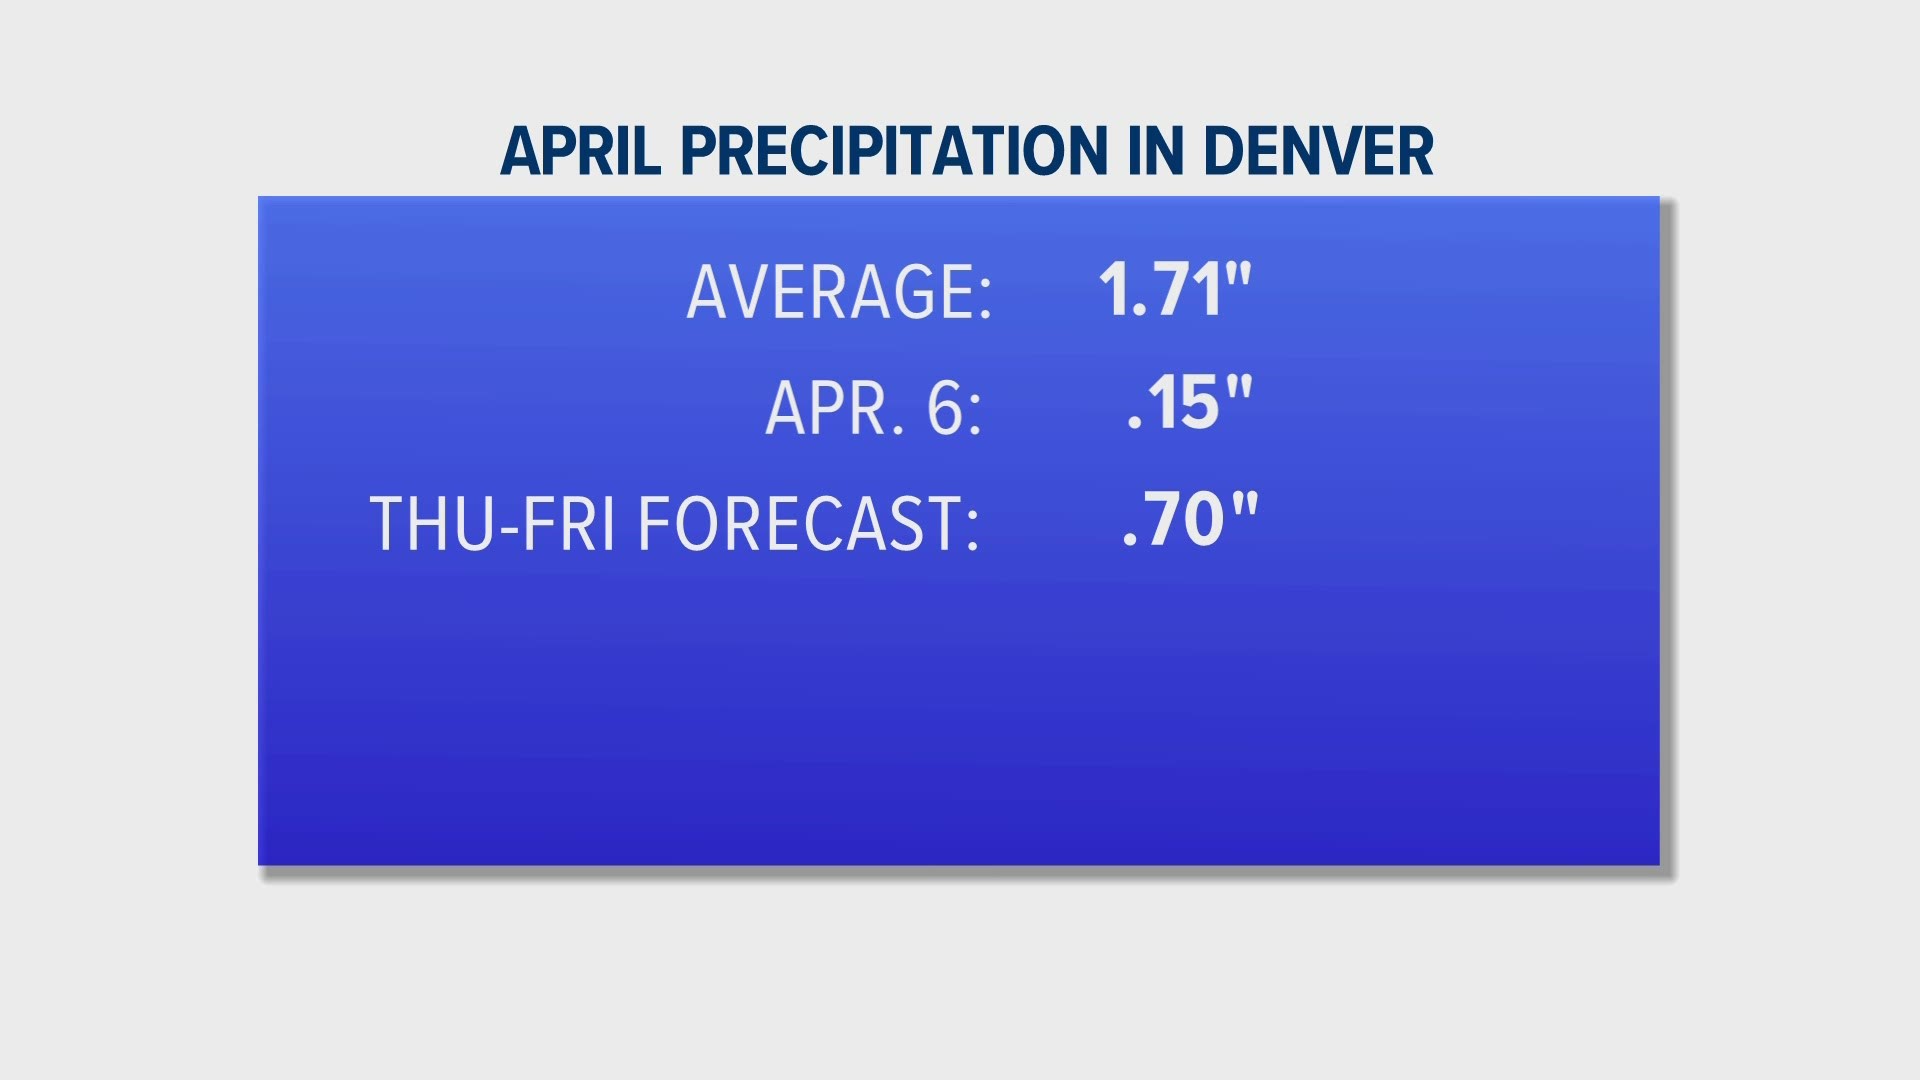 The wet storms are giving Coloradans hope that May will also bring a wetter than normal forecast.